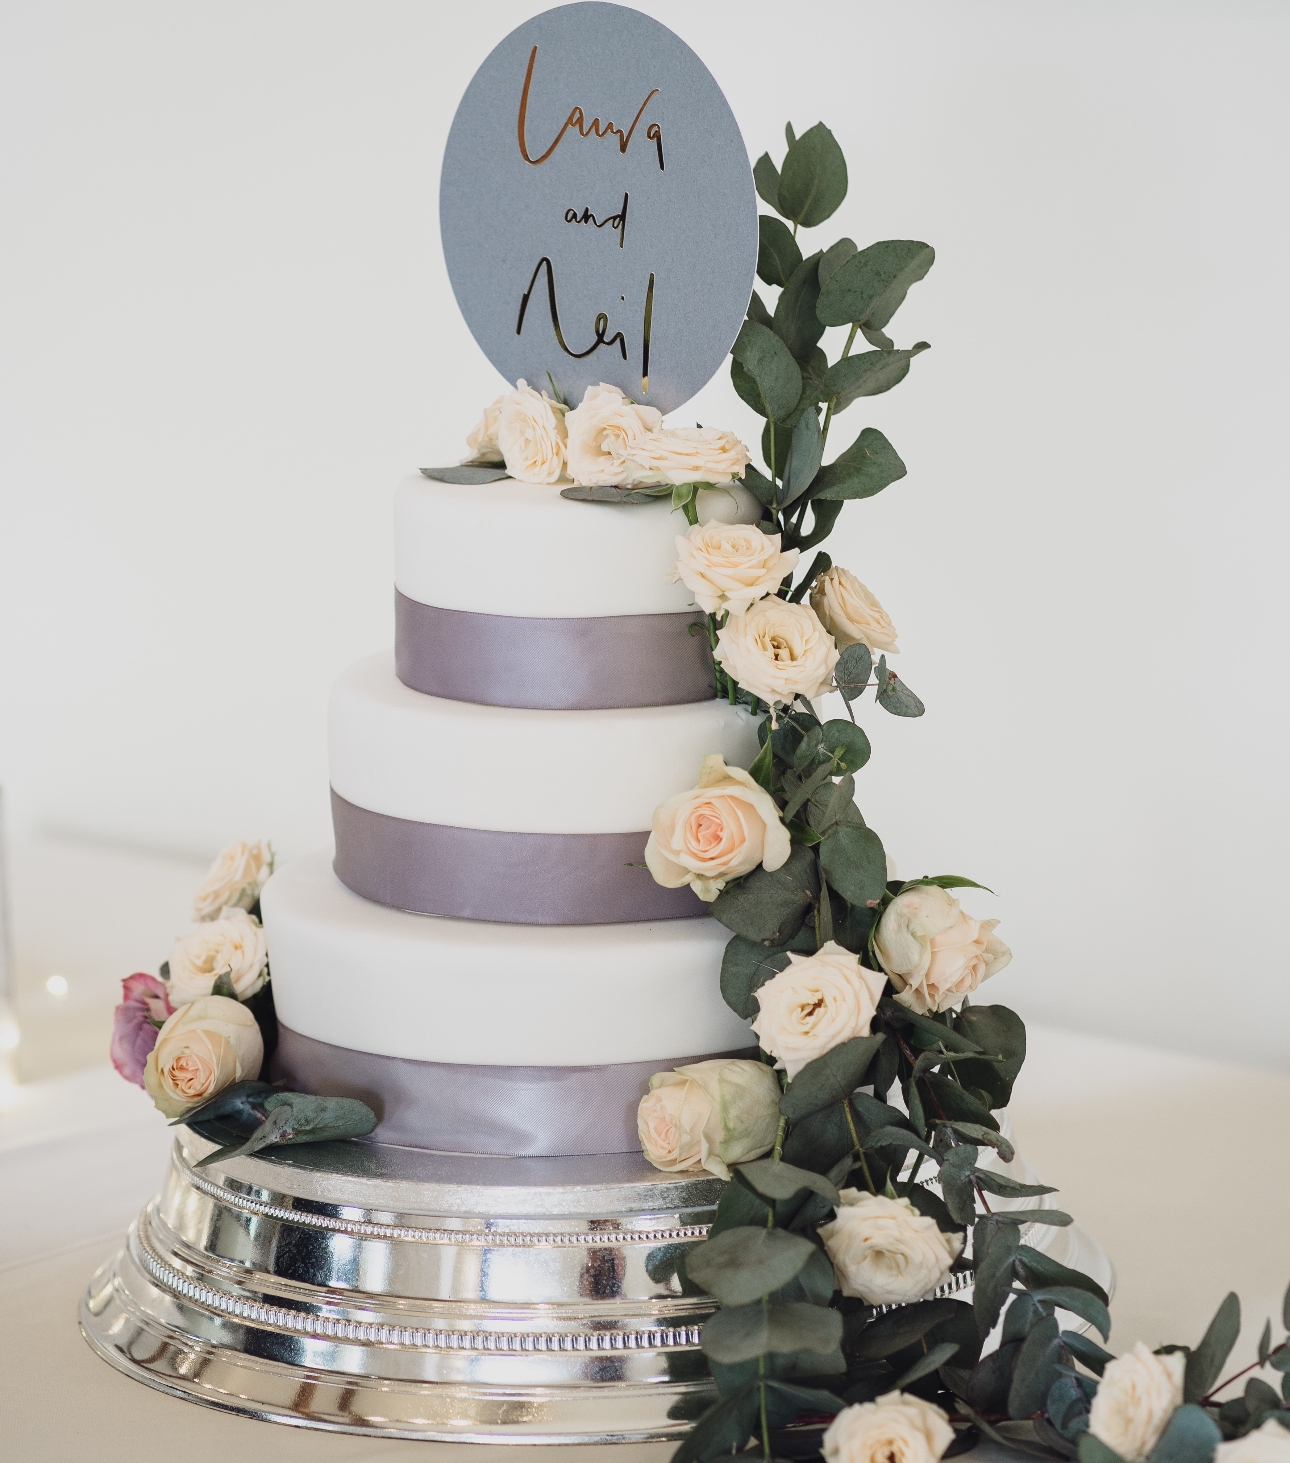 White three-tier cake with flowers and a personalised disc topper